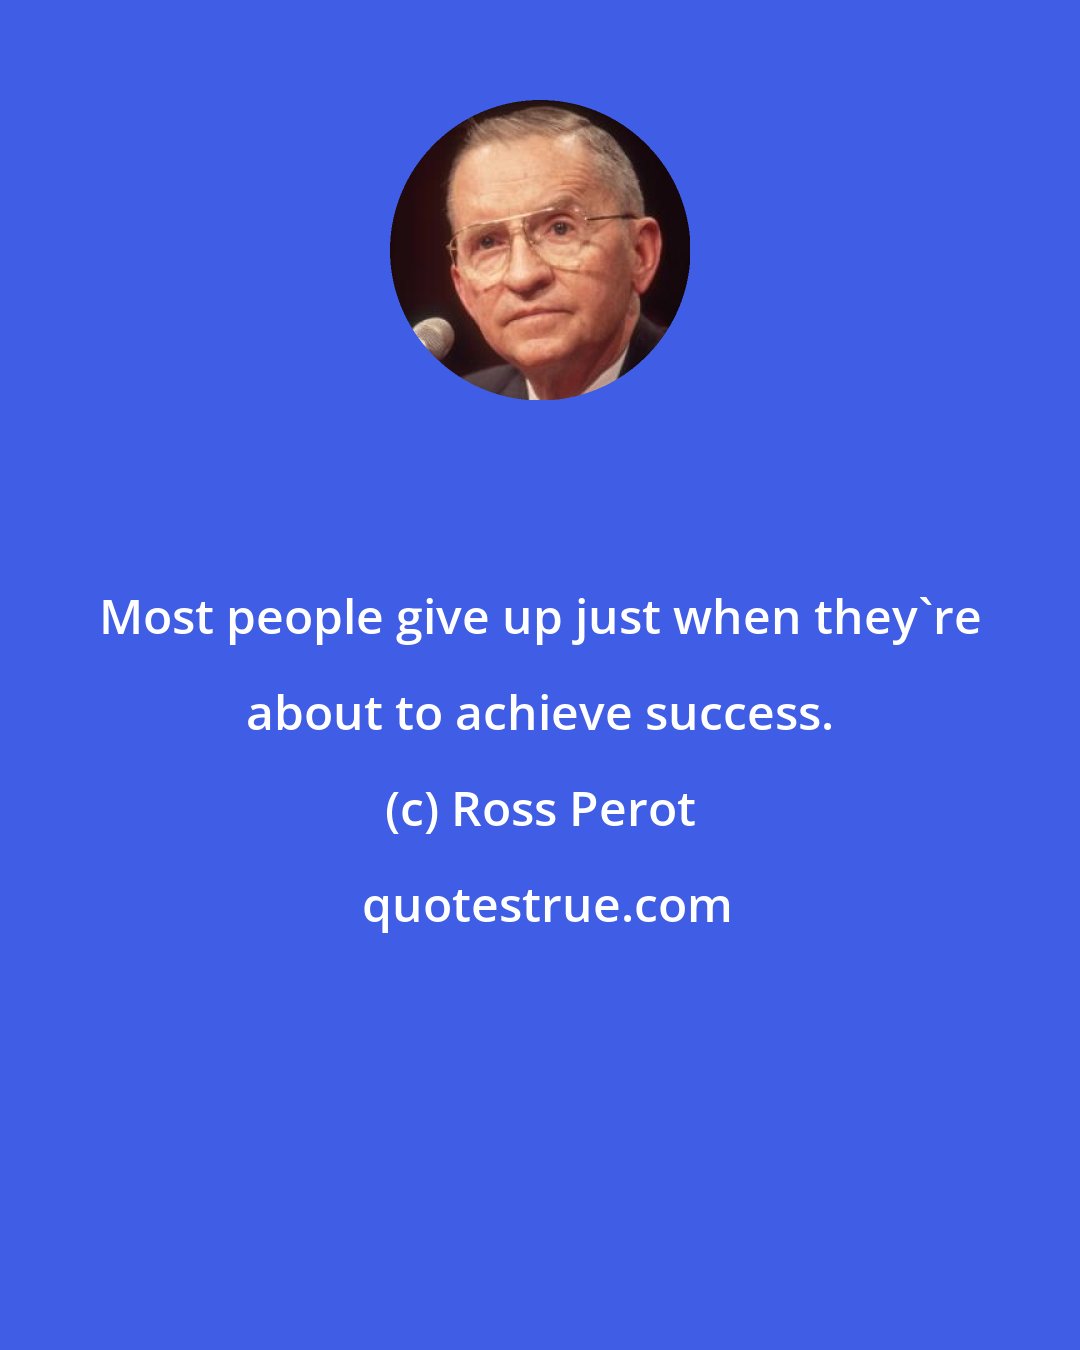 Ross Perot: Most people give up just when they're about to achieve success.